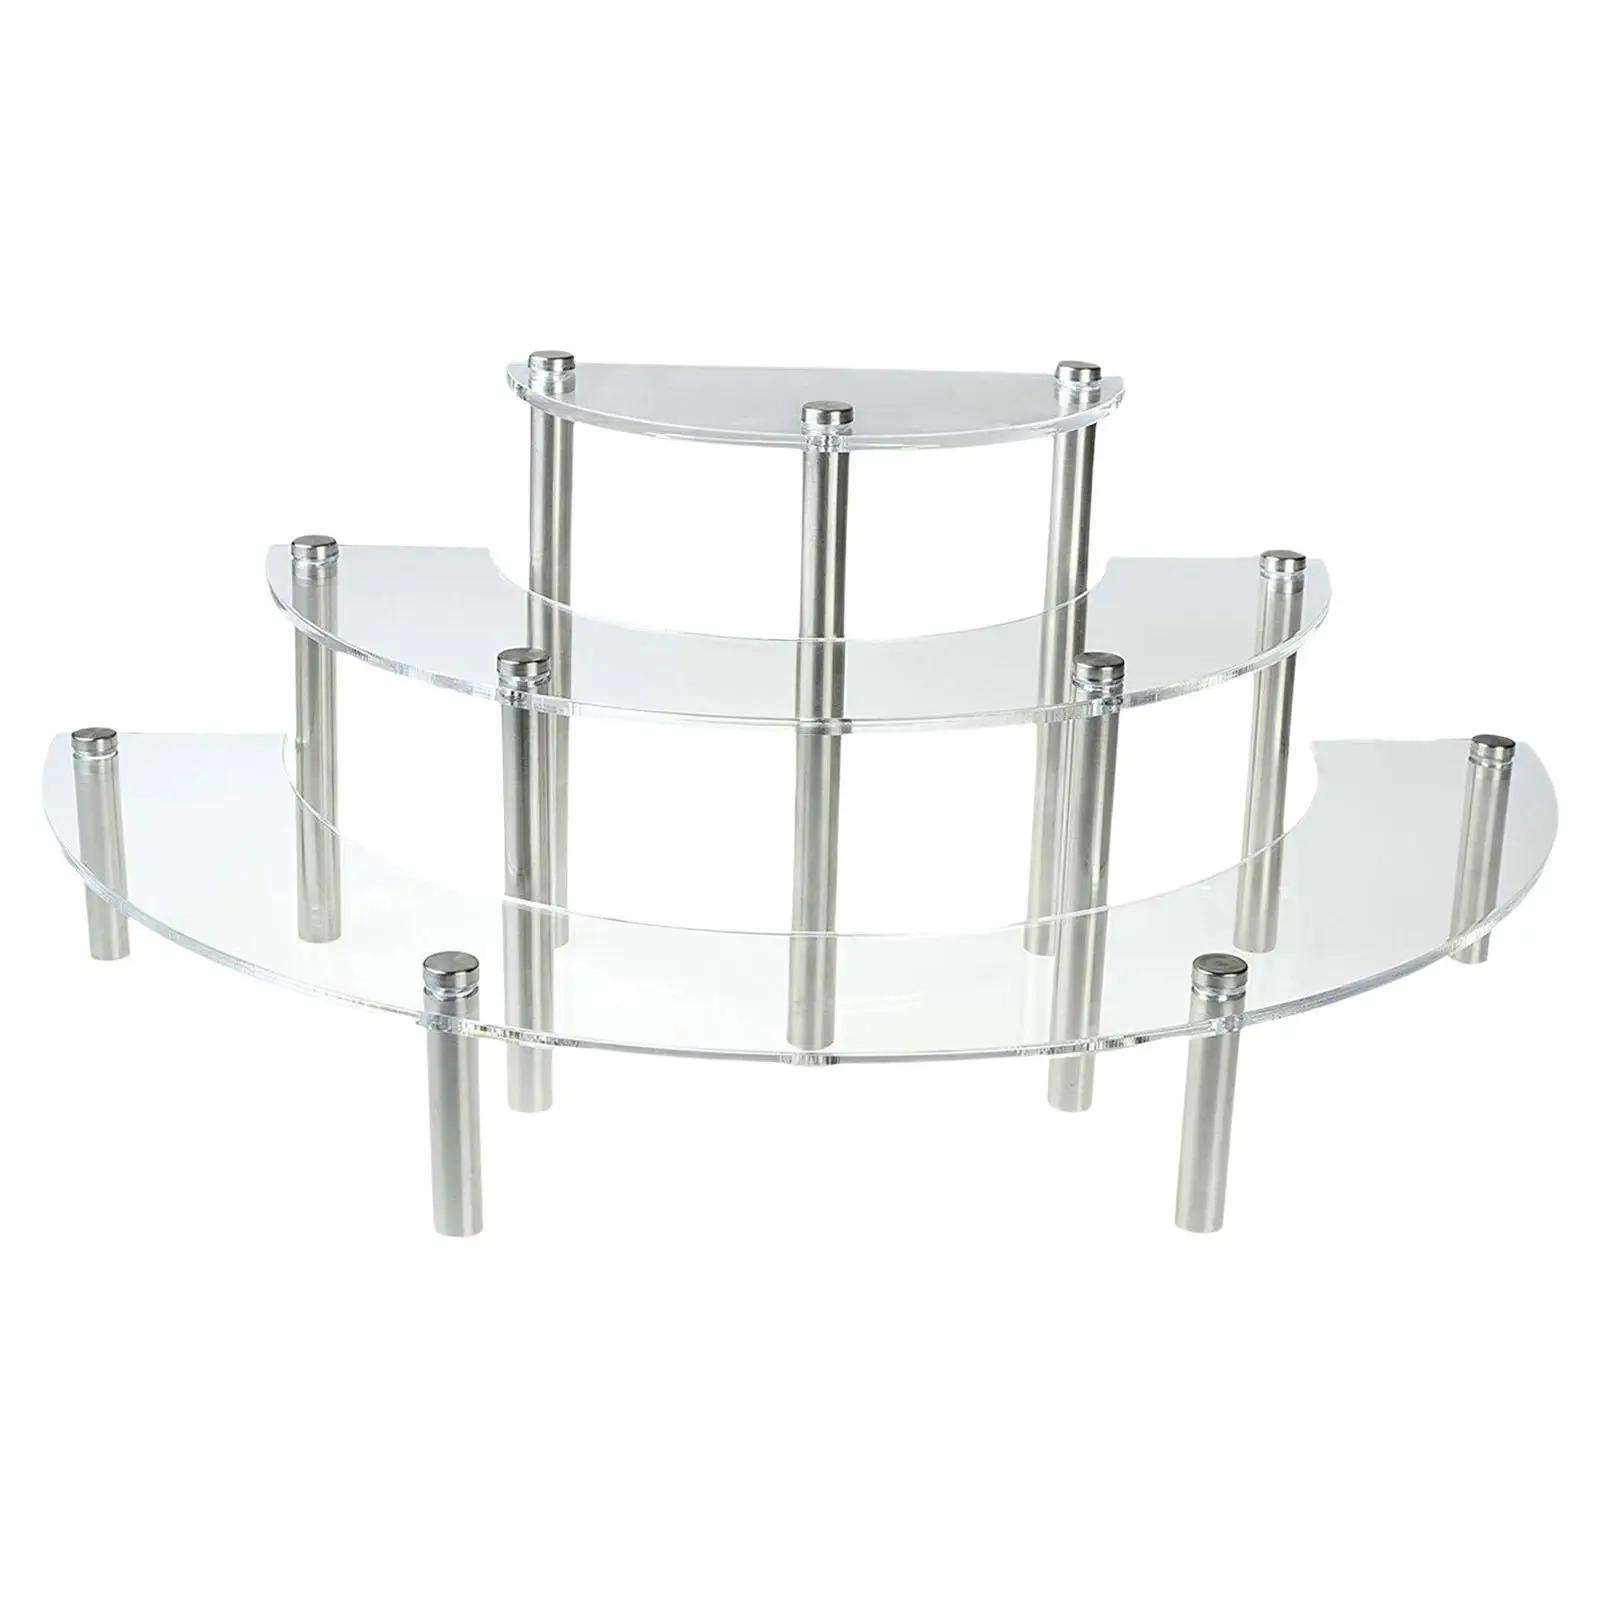 Acrylic Half Moon Shelf Cupcake Dessert Display Stand Shelves, Tabletop Collectible Product Showcase Risers